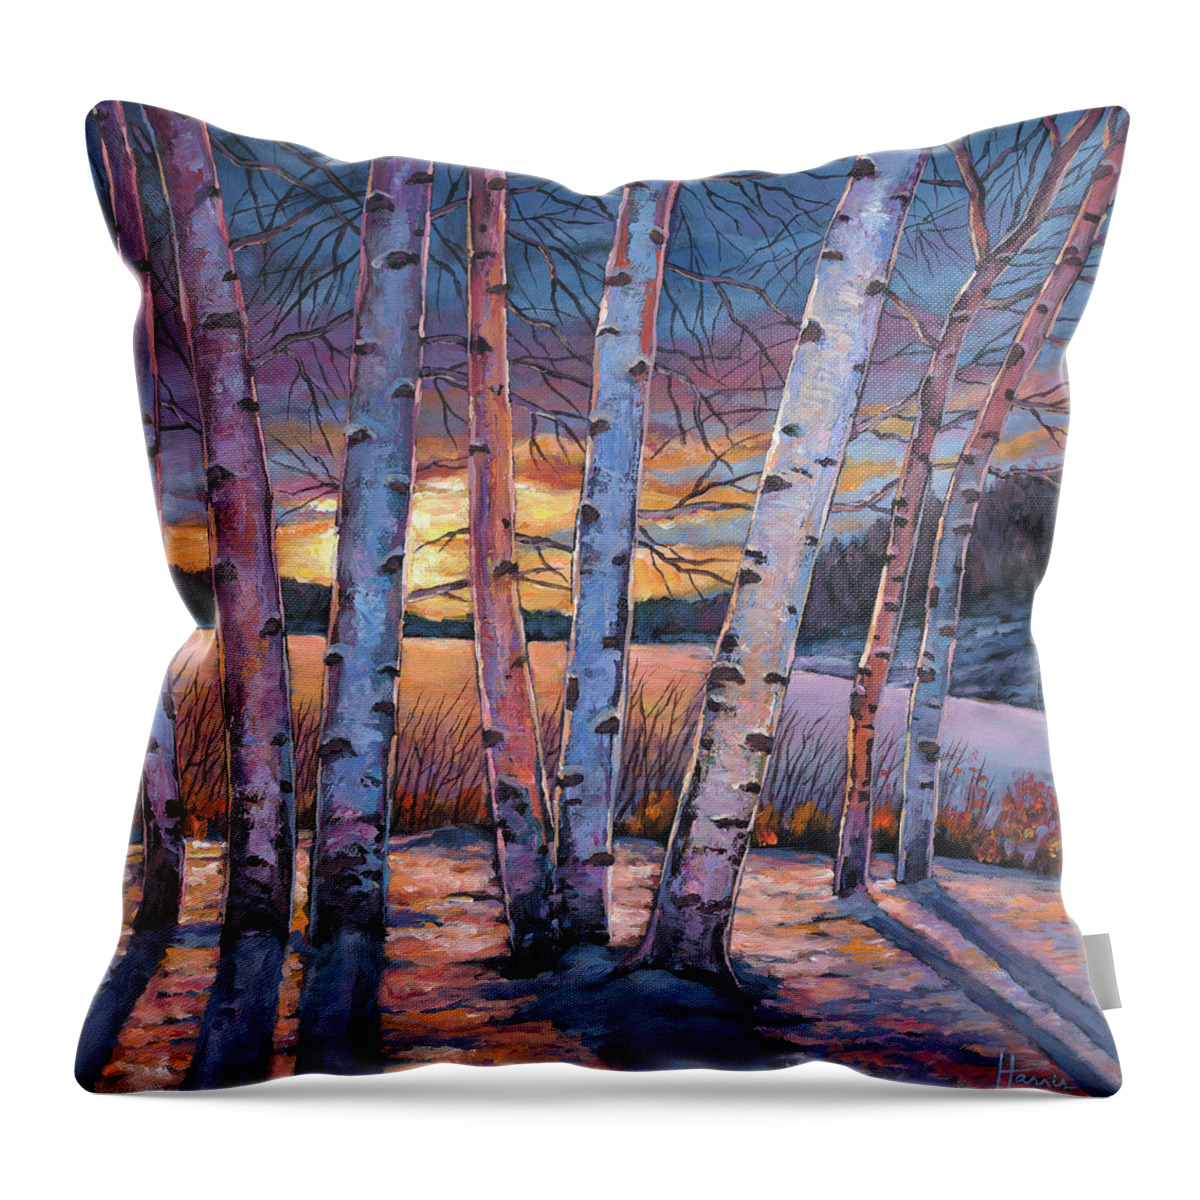 Winter Aspen Throw Pillow featuring the painting Wish You Were Here by Johnathan Harris